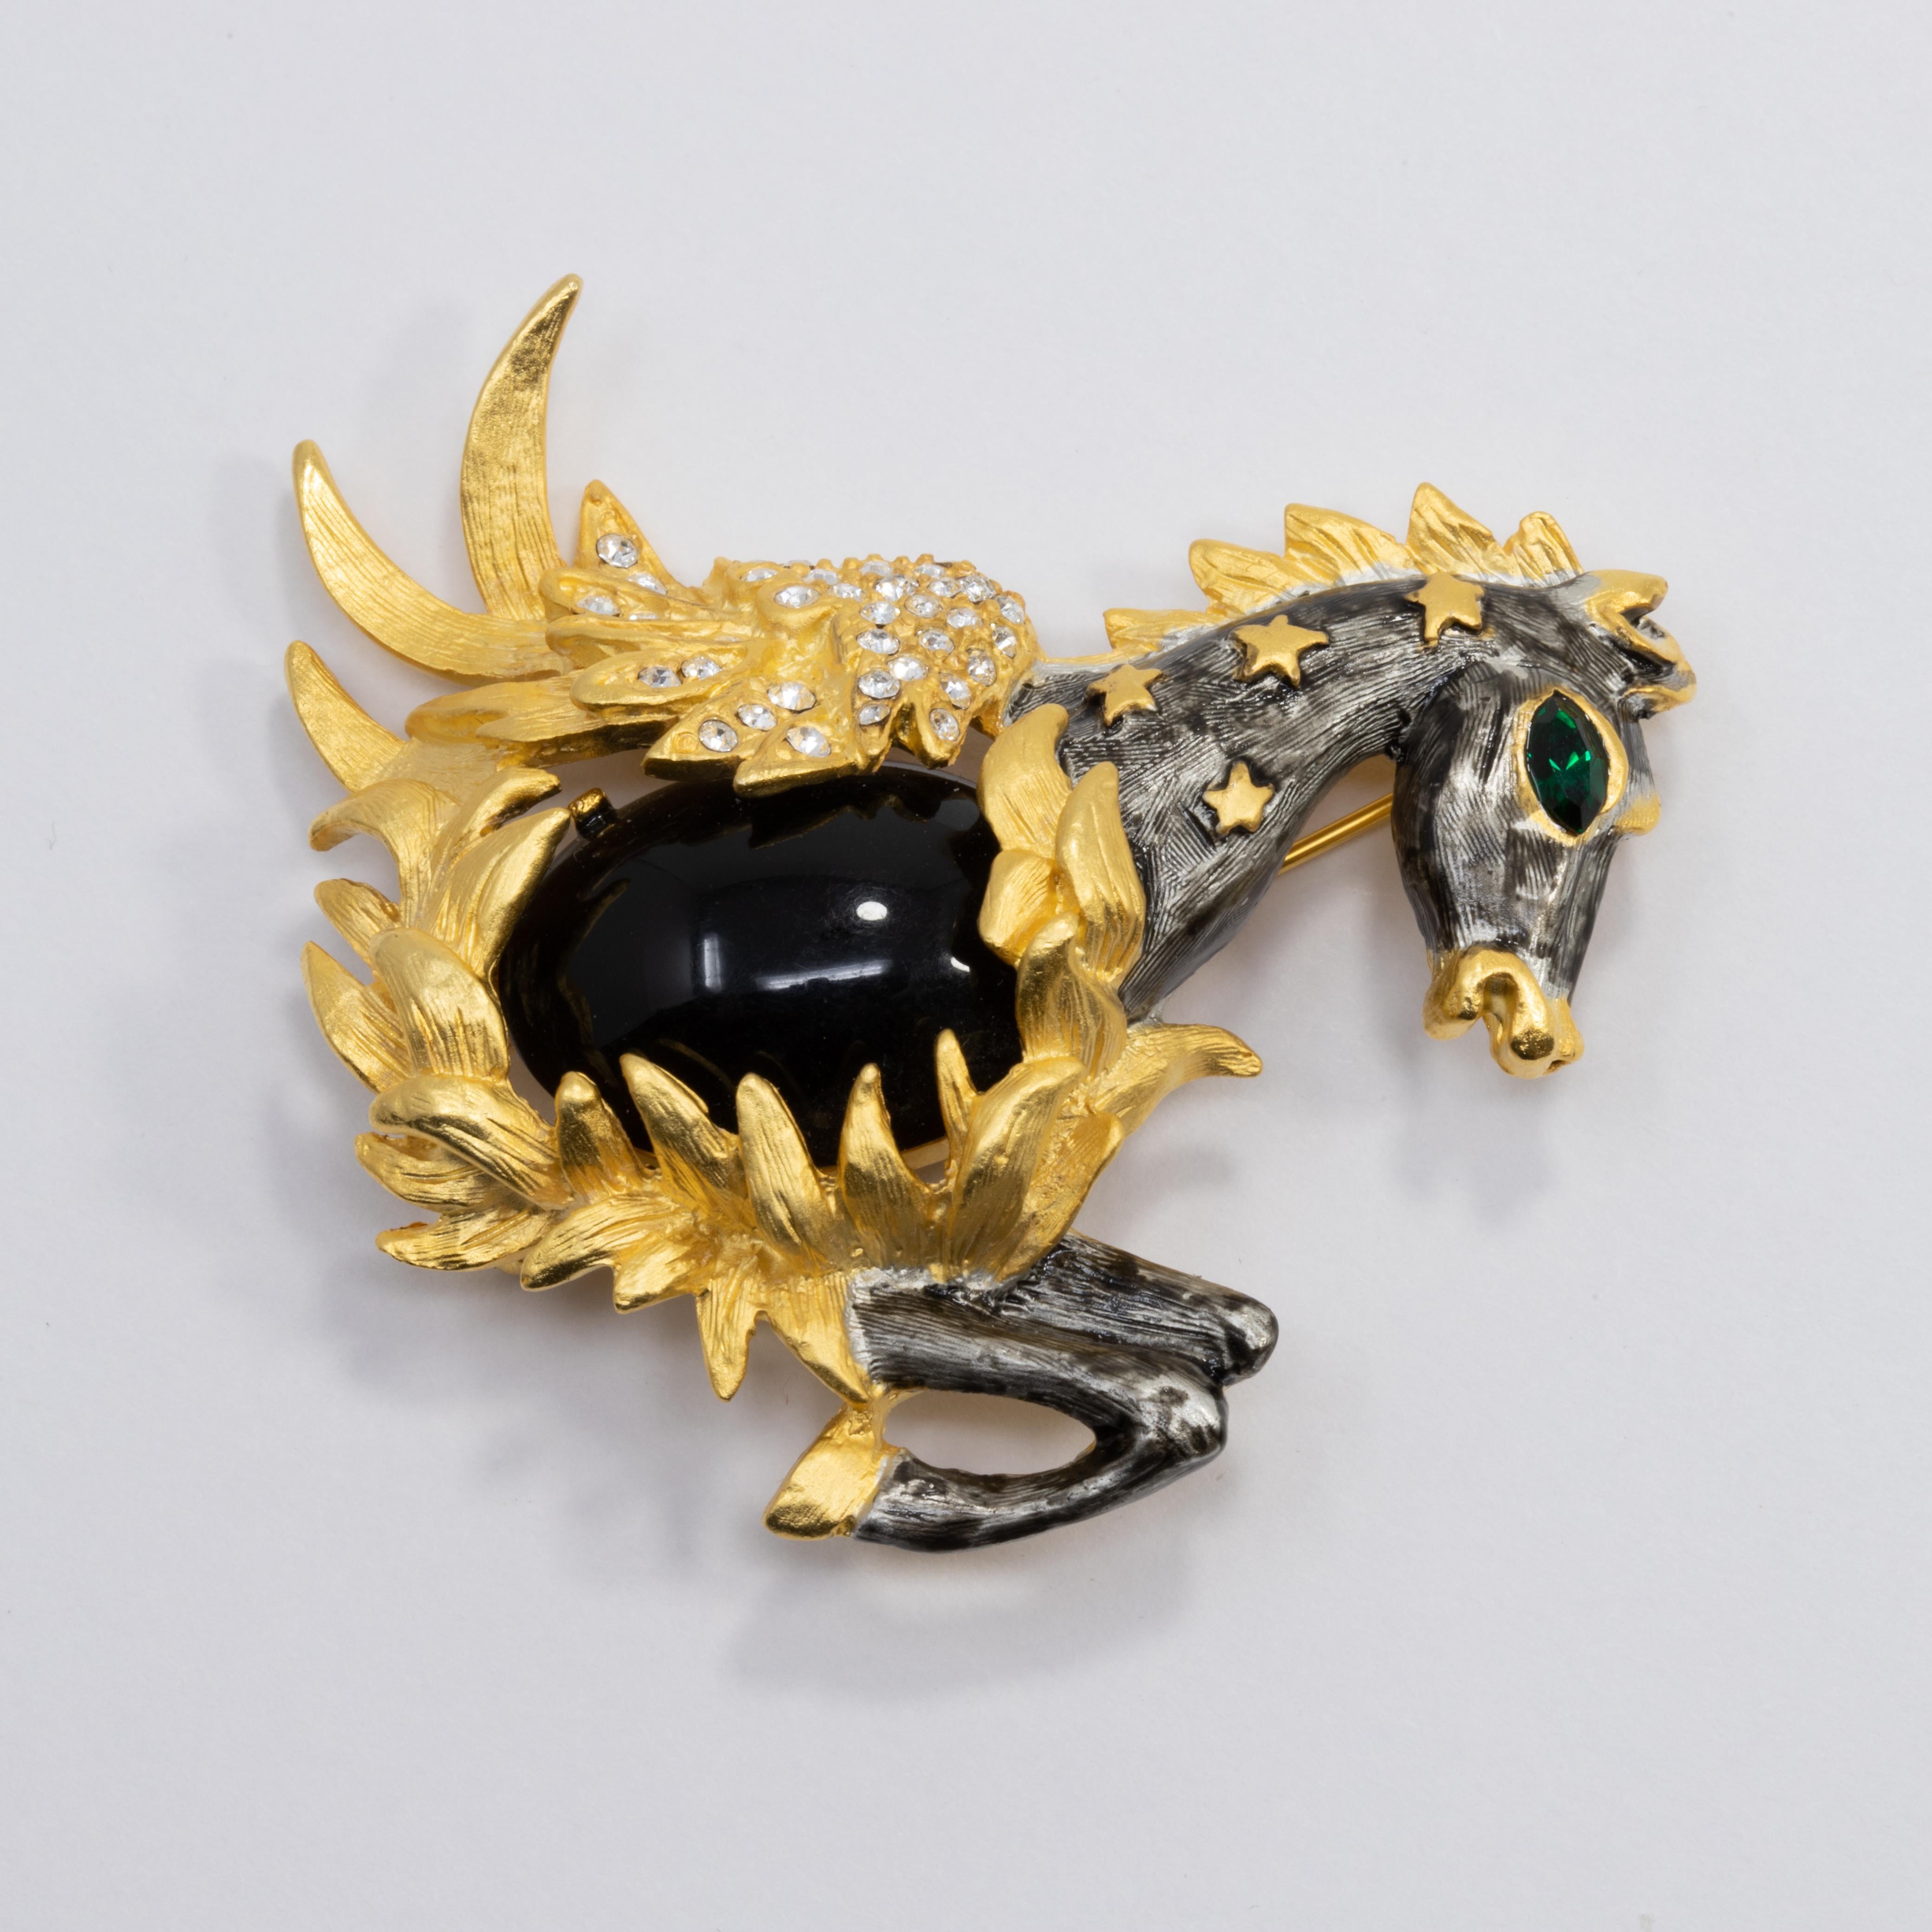 A bold and stylish pegasus pin by Kenneth Jay Lane! Features a painted dark gray horse with golden wings, accented with pave crystals and a centerpiece black cabochon.

Hallmarks: Kenneth © Lane